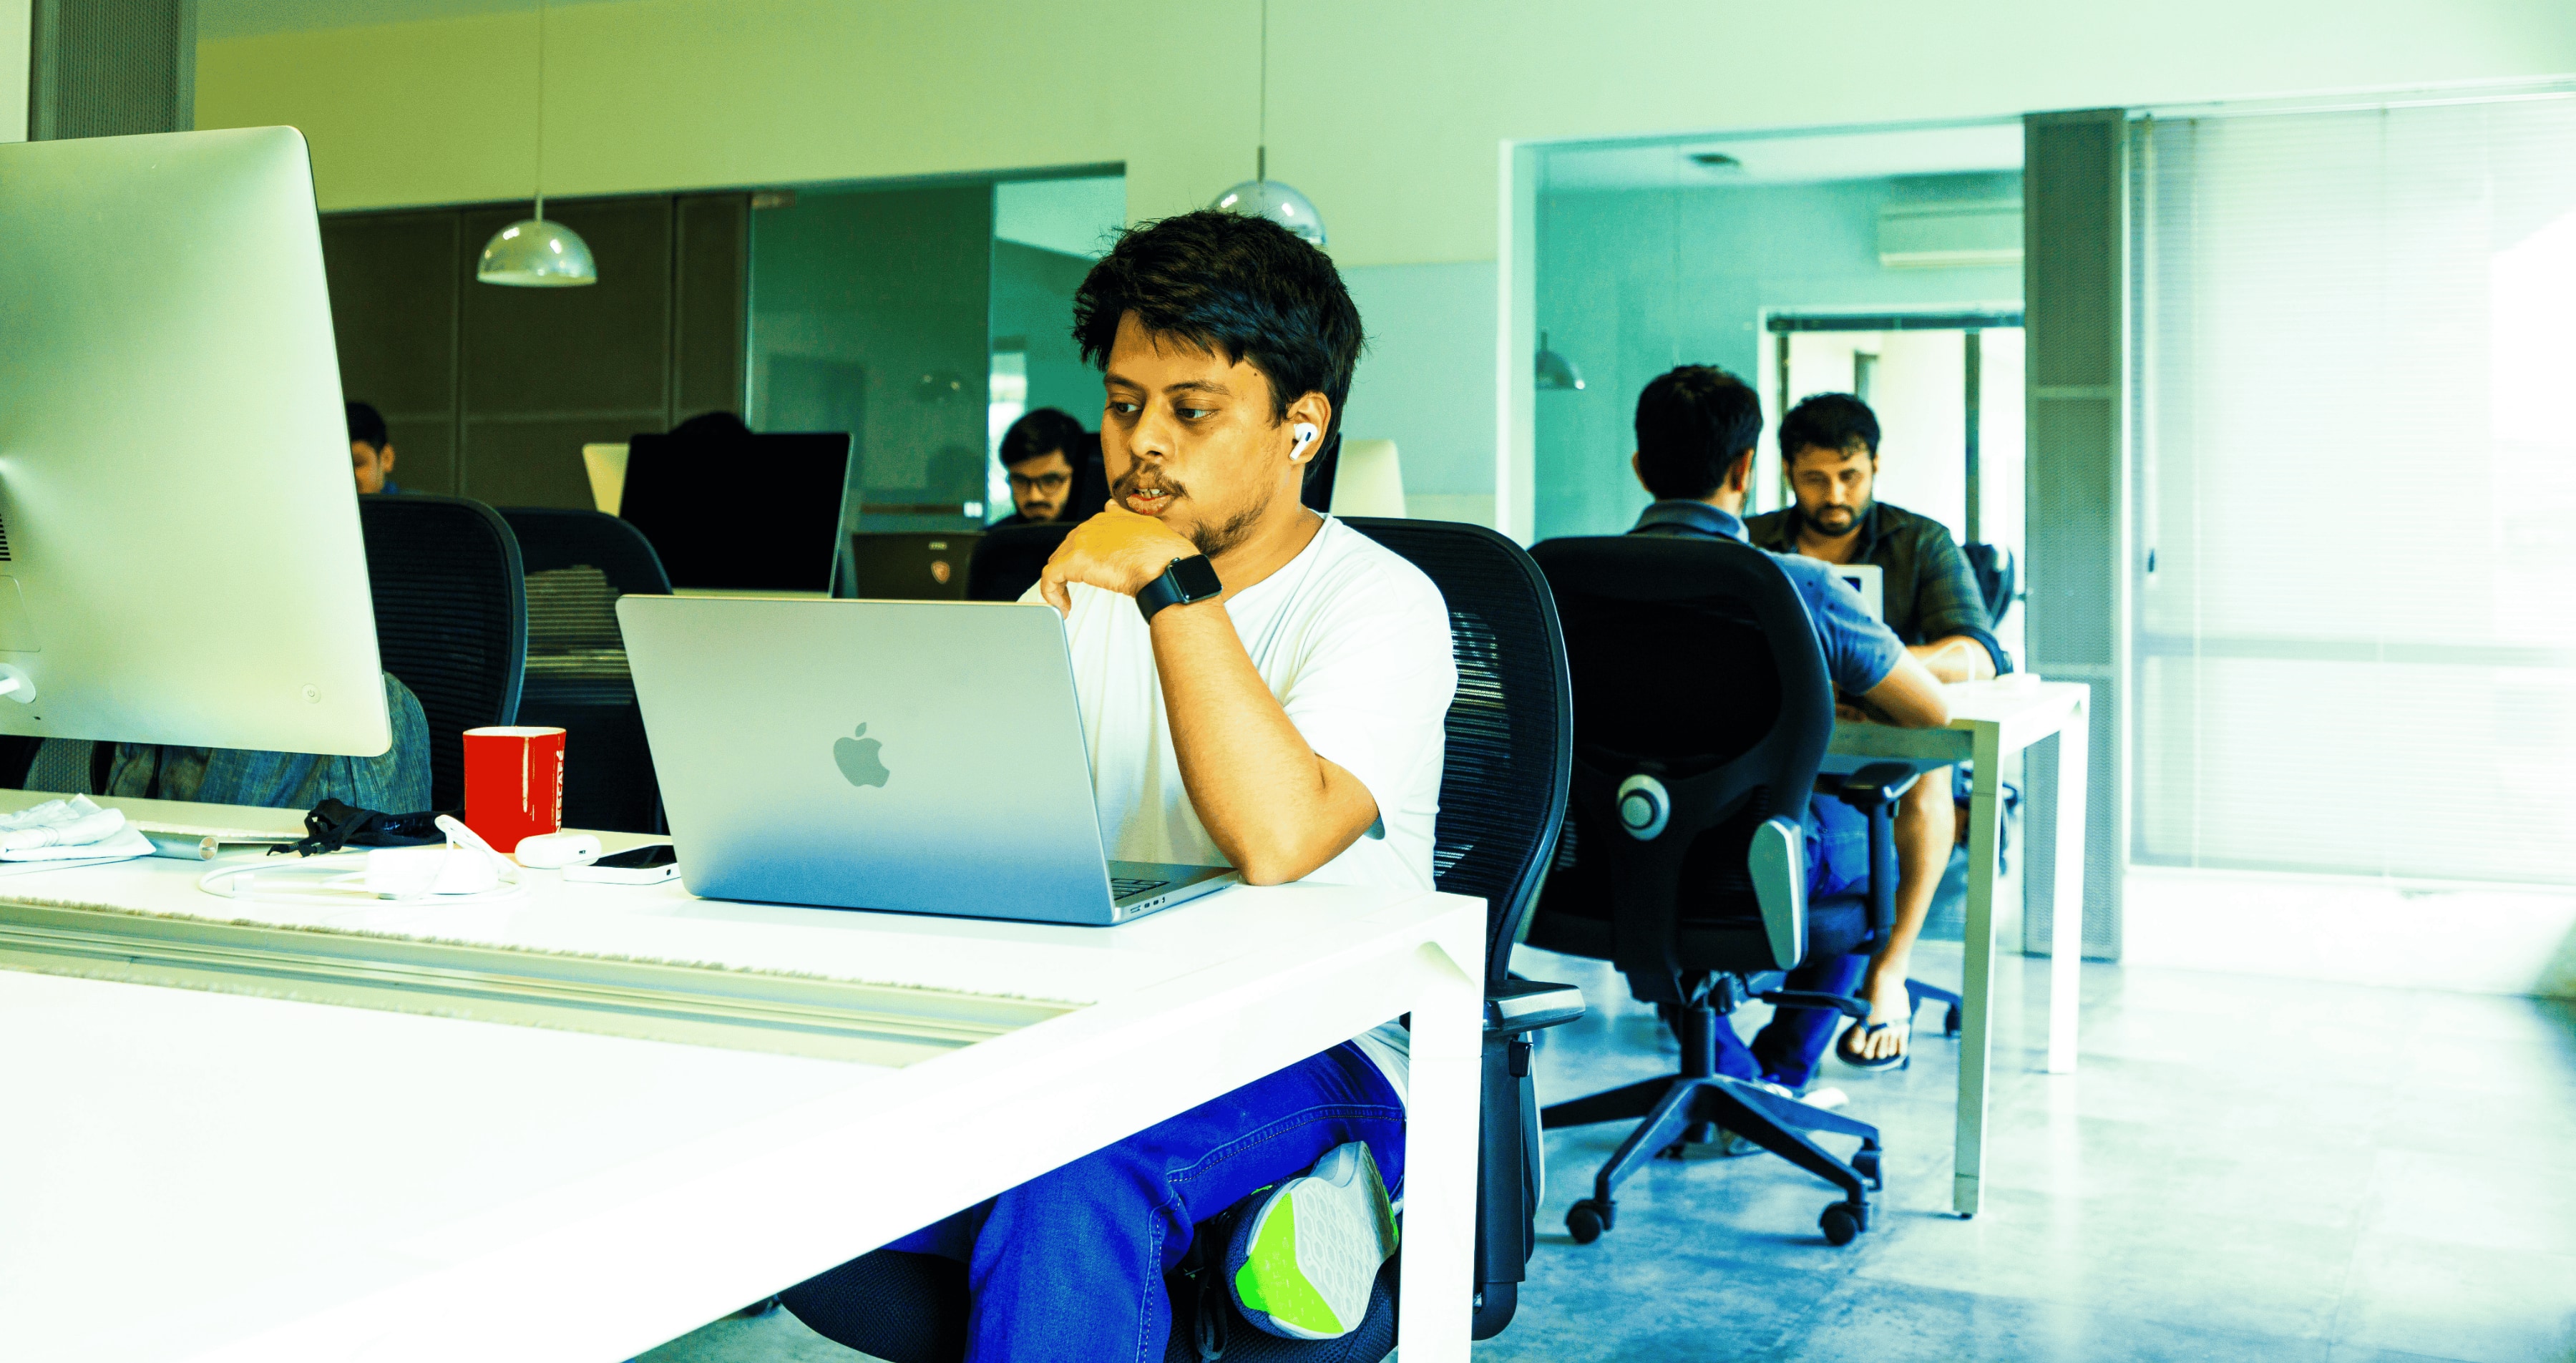 In a brightly lit office, a young man from the design team works diligently on his laptop, surrounded by the focused energy of his teammates, embodying the harmony of design and engineering at Samespace.